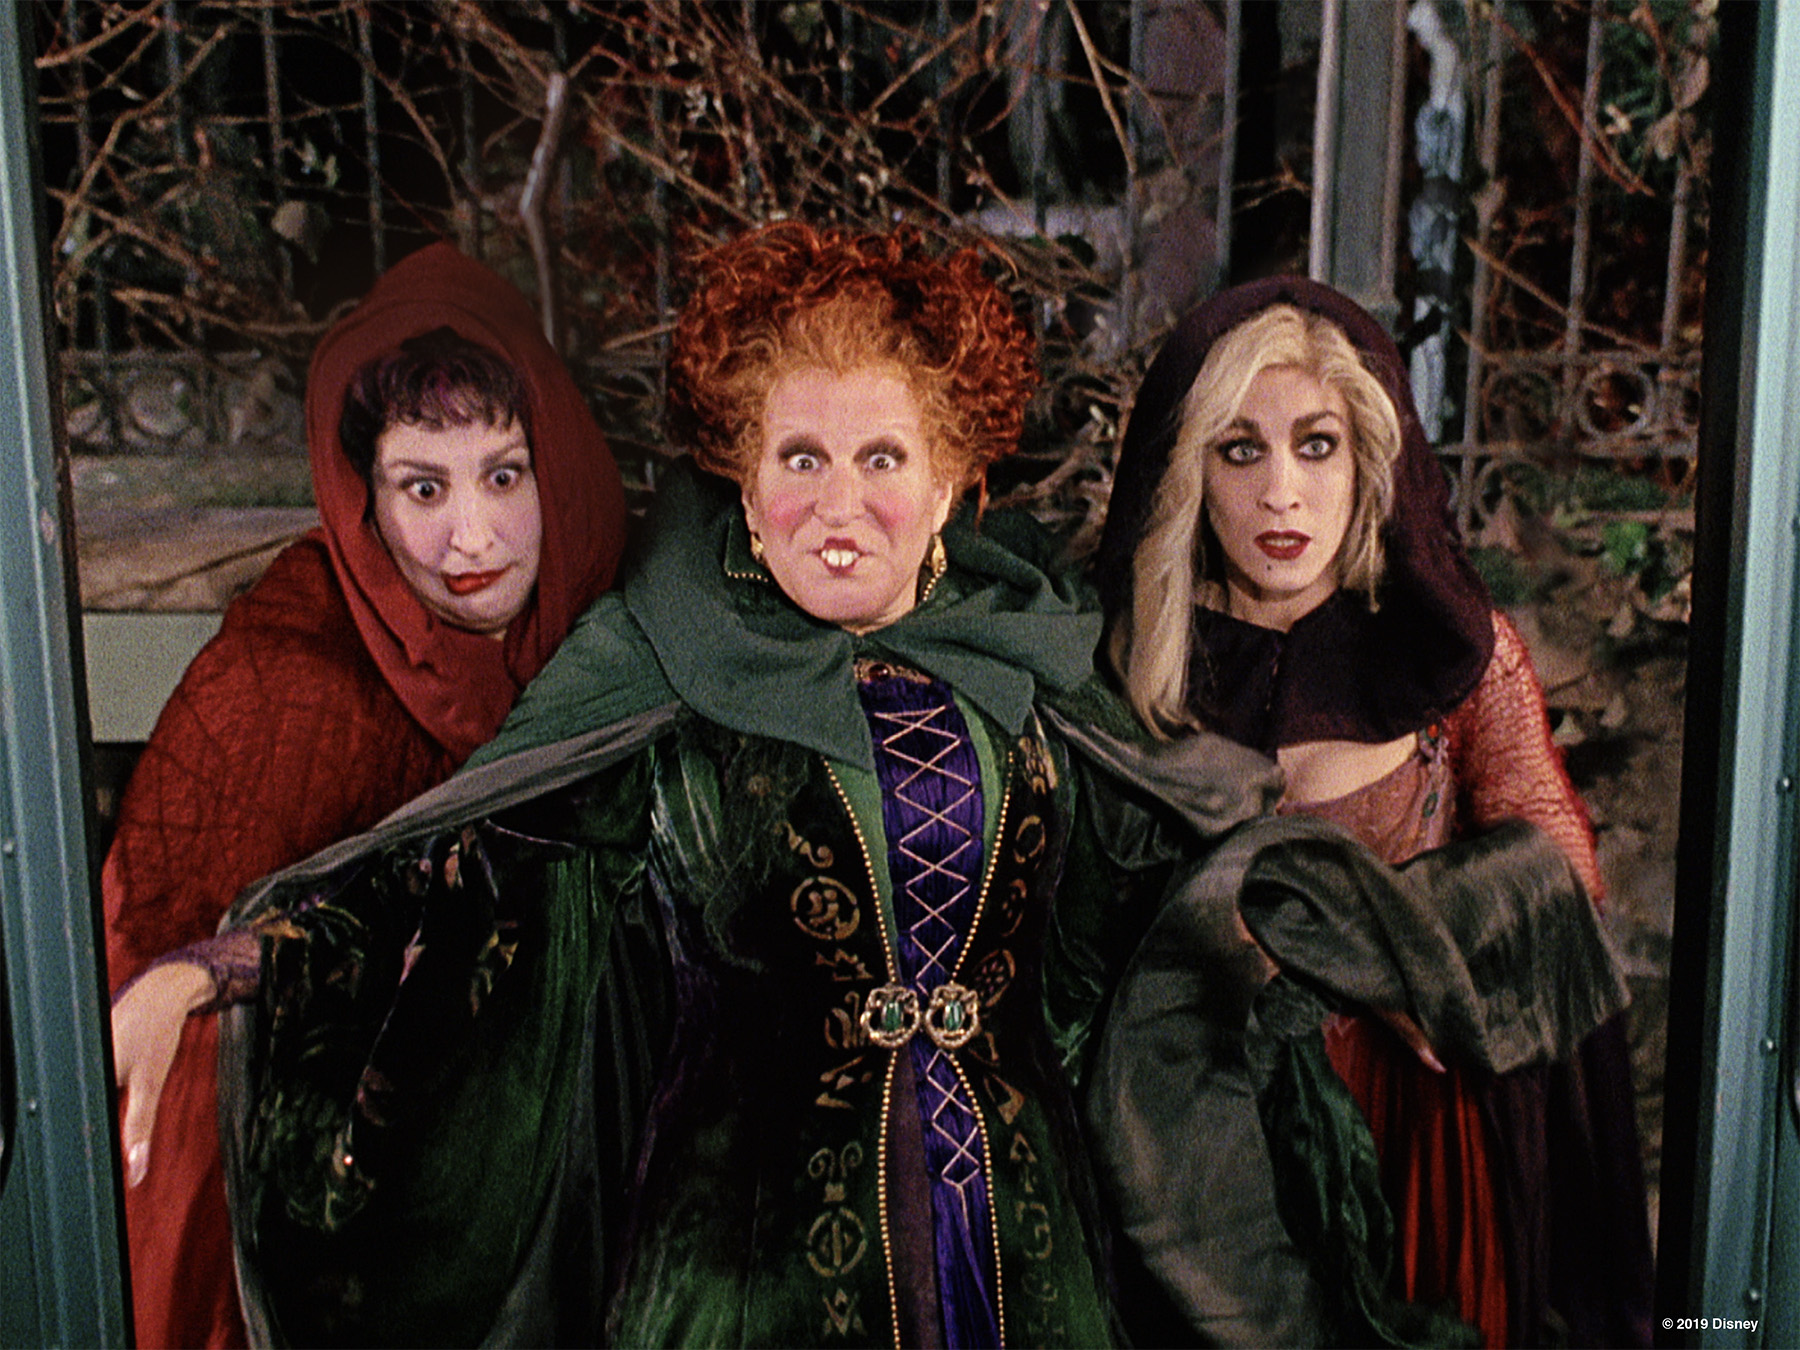 The Sanderson Sisters Have Flown Into Starbucks With Three Hocus Pocus Themed Drinks This